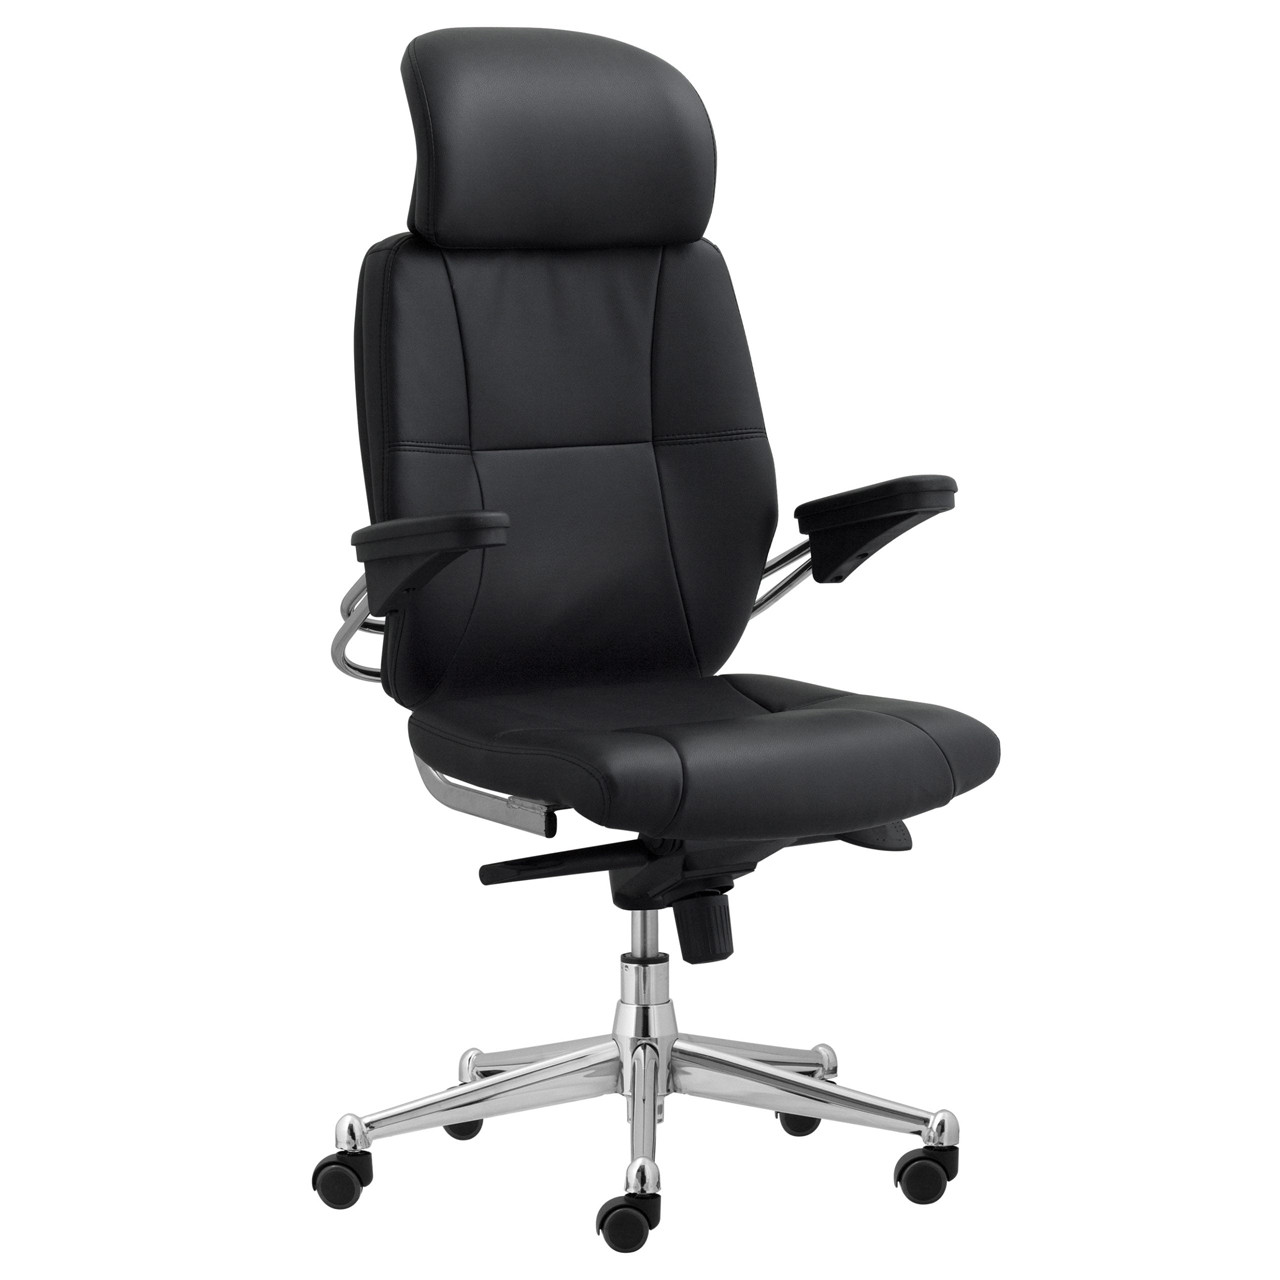 Trent Task Chair with Headrest - Black